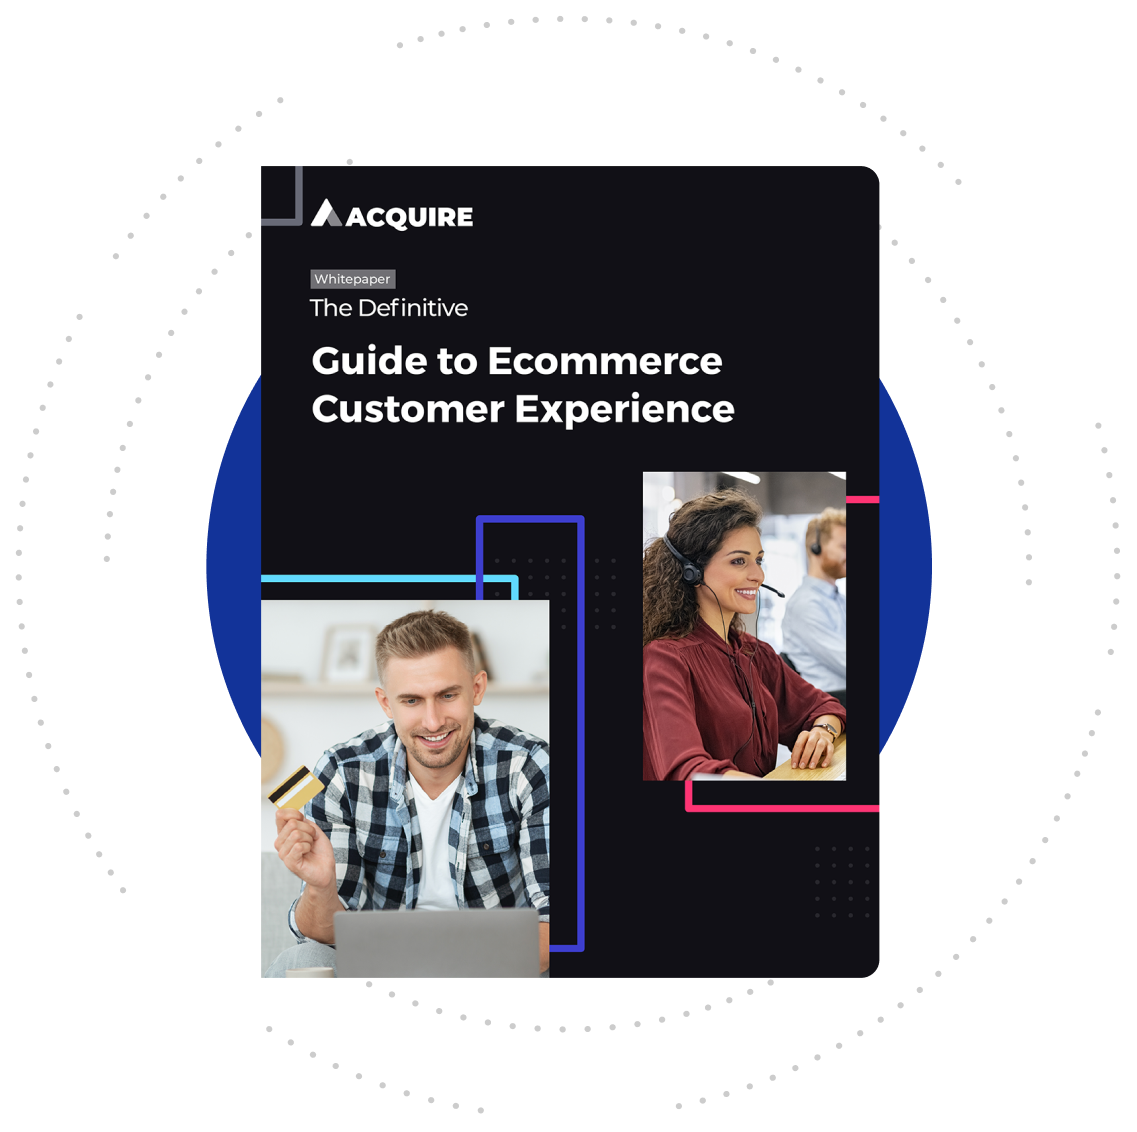 The Definitive Guide to Ecommerce Customer Experience Whitepaper